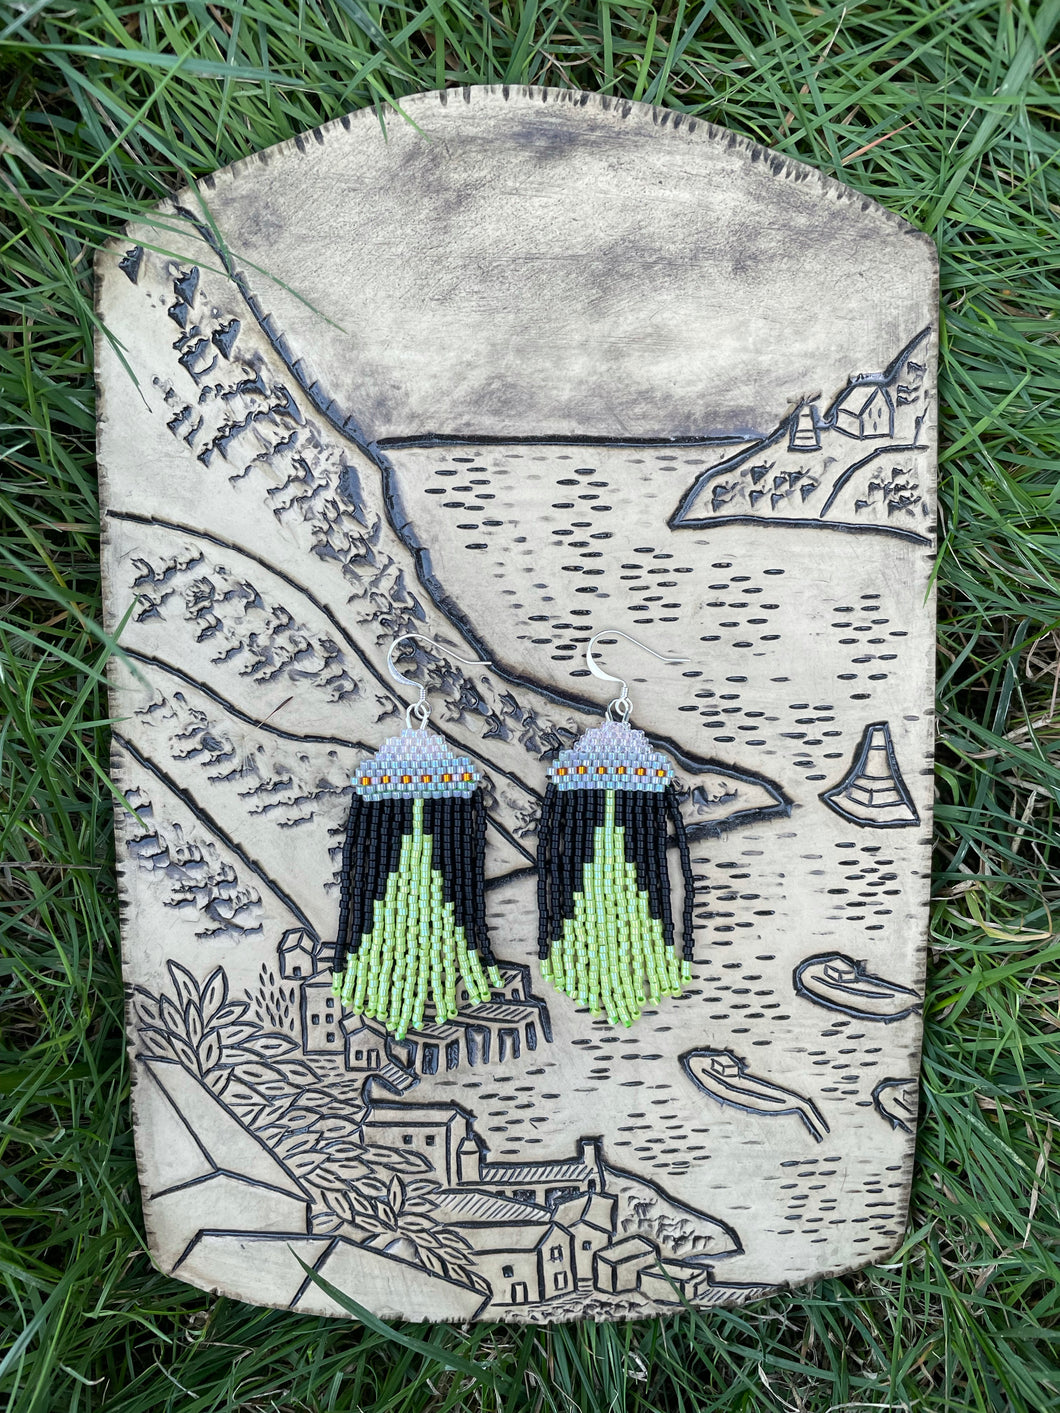 A pair of earrings depicting a UFO with a tractor beam, made from glass beads lays on a ceramic plaque depicting a harbour, which lays on the grass